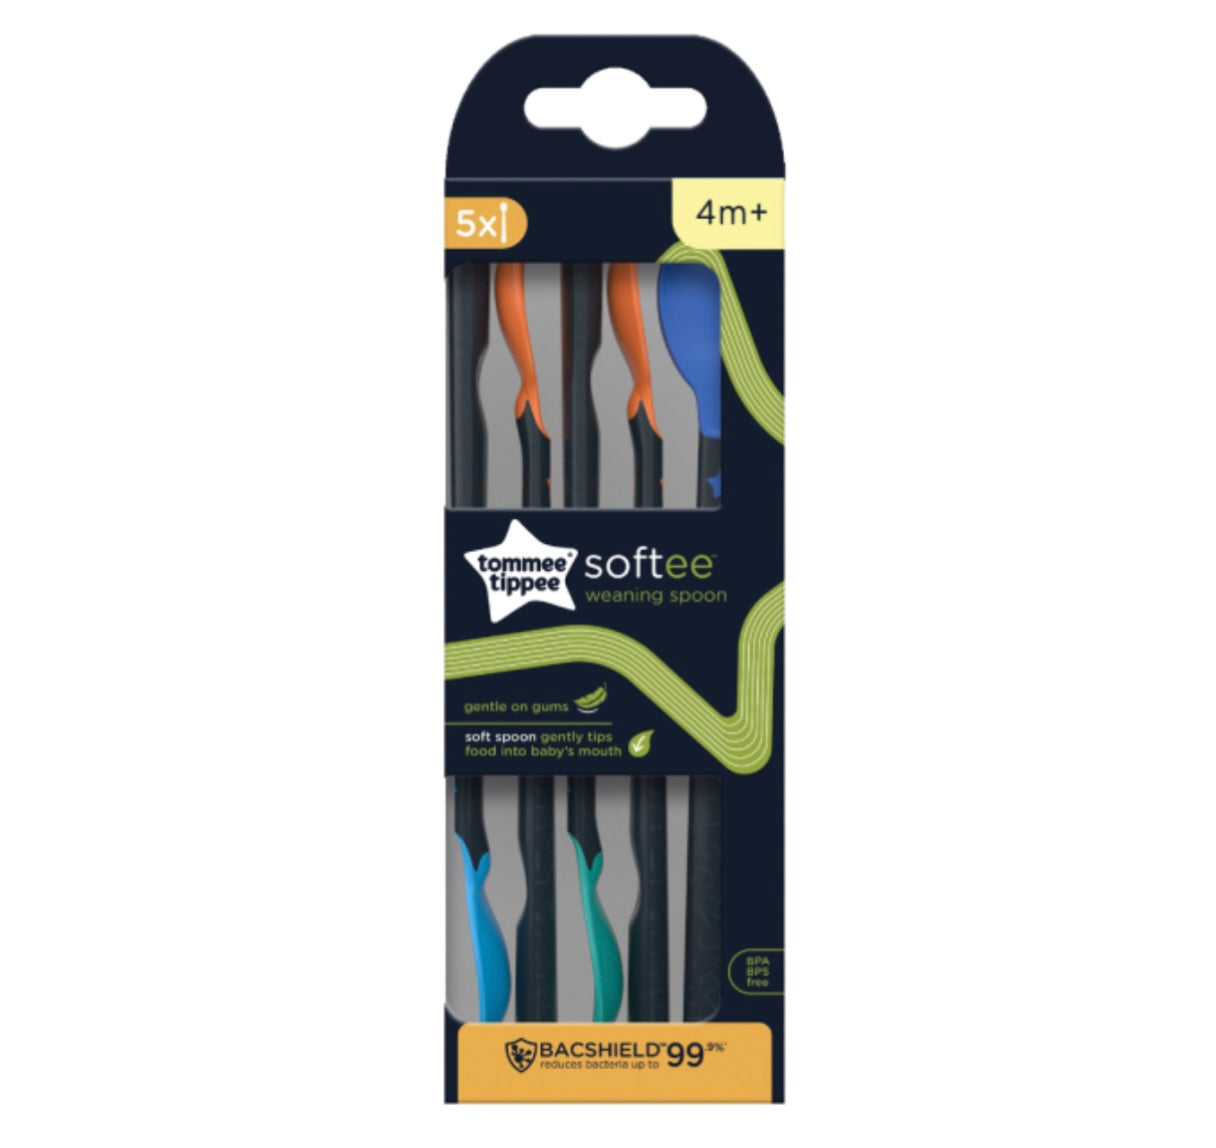 Softee™ weaning spoons x5